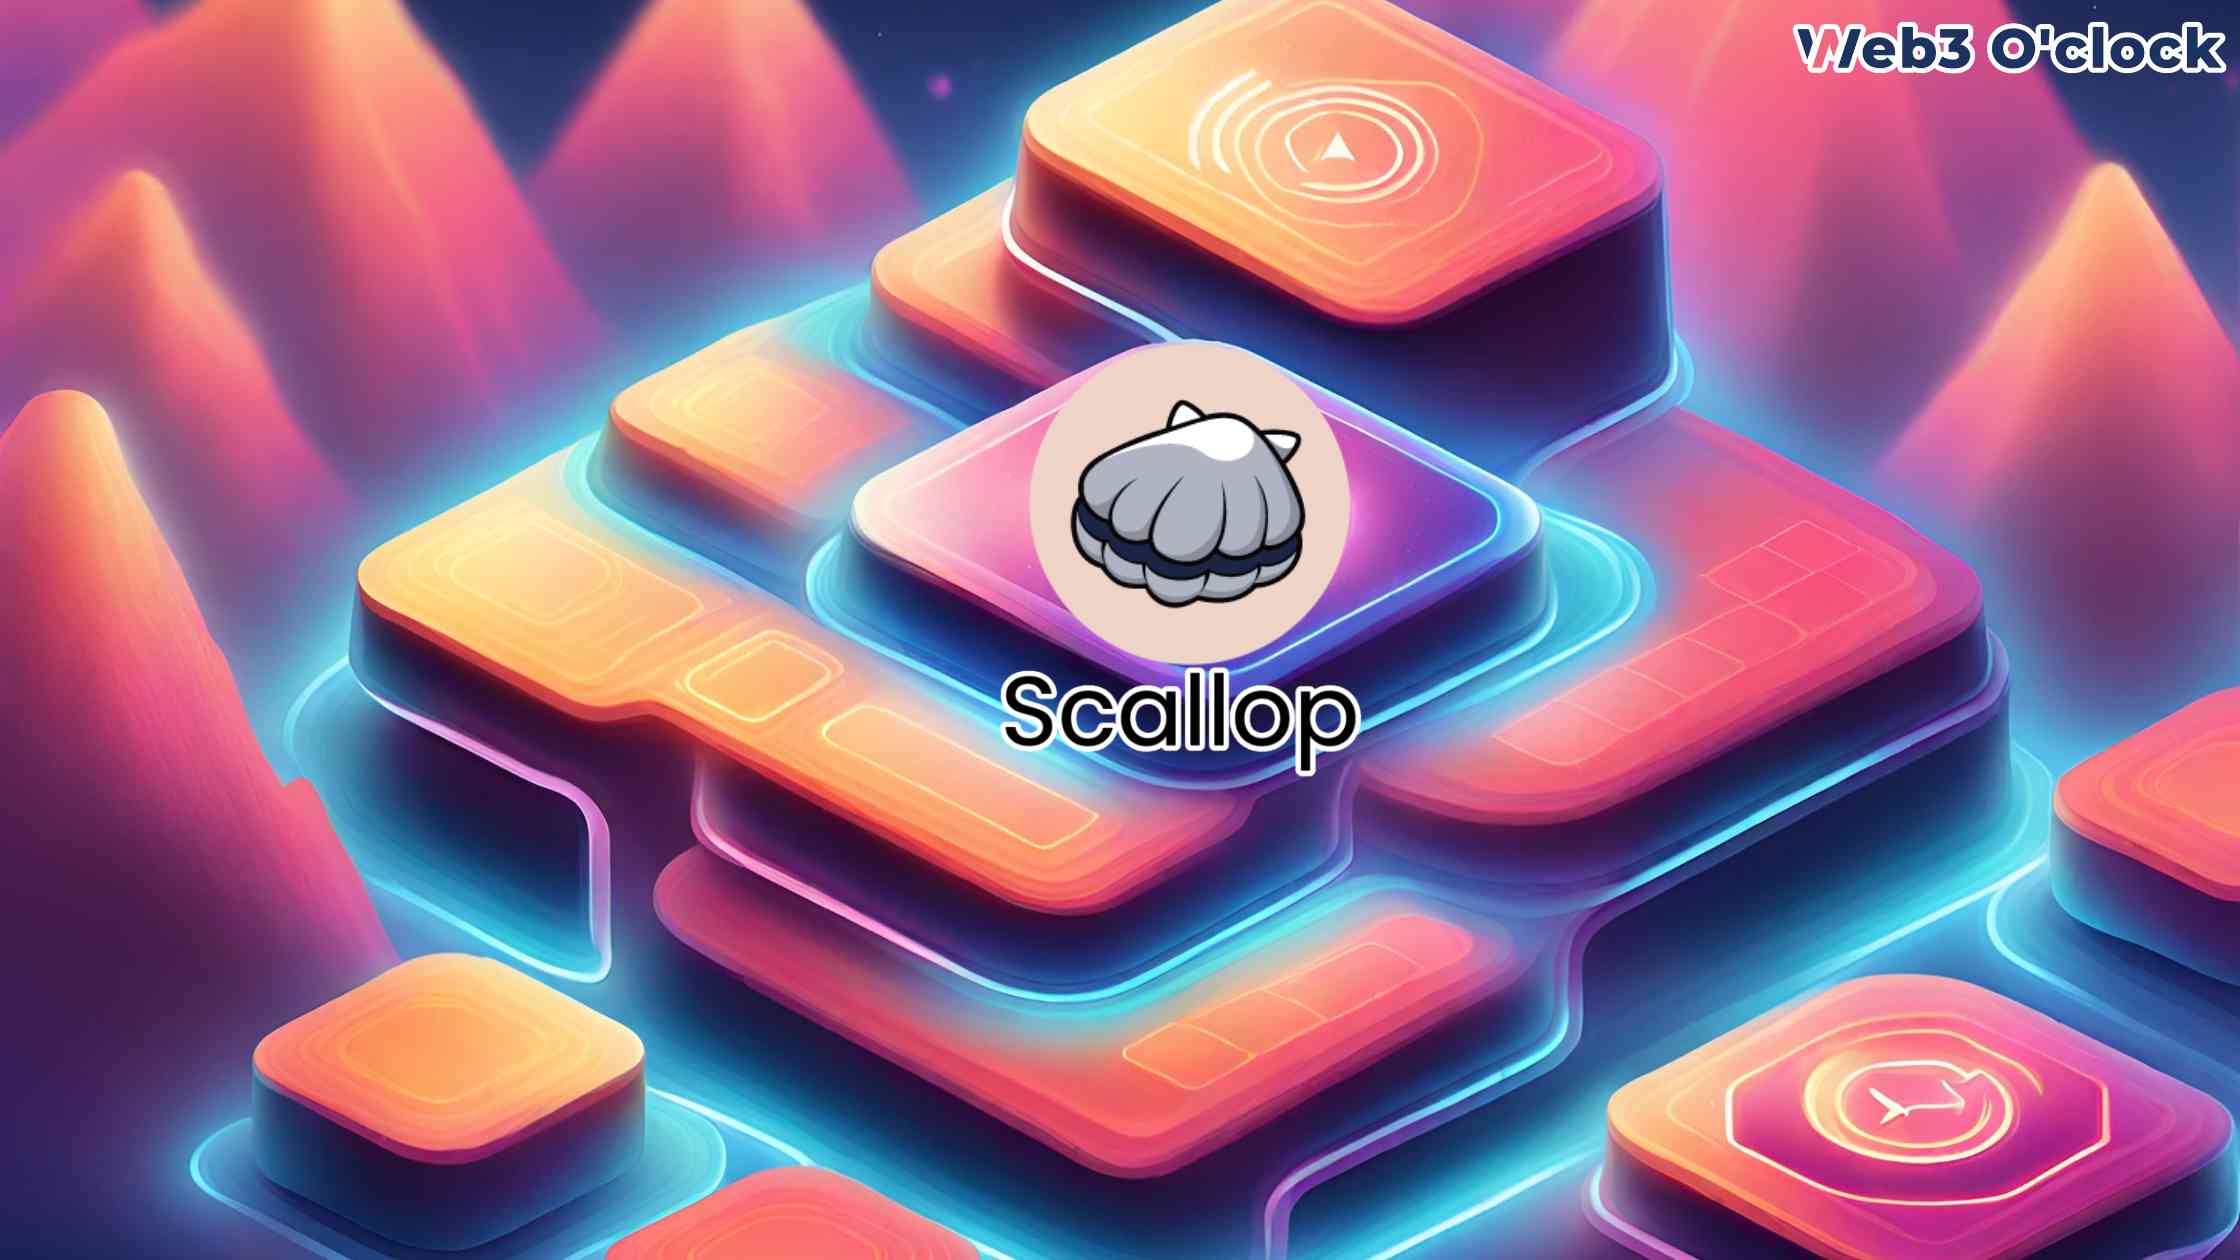 Scallop Protocol Secures a Funding By Web3 O'clock